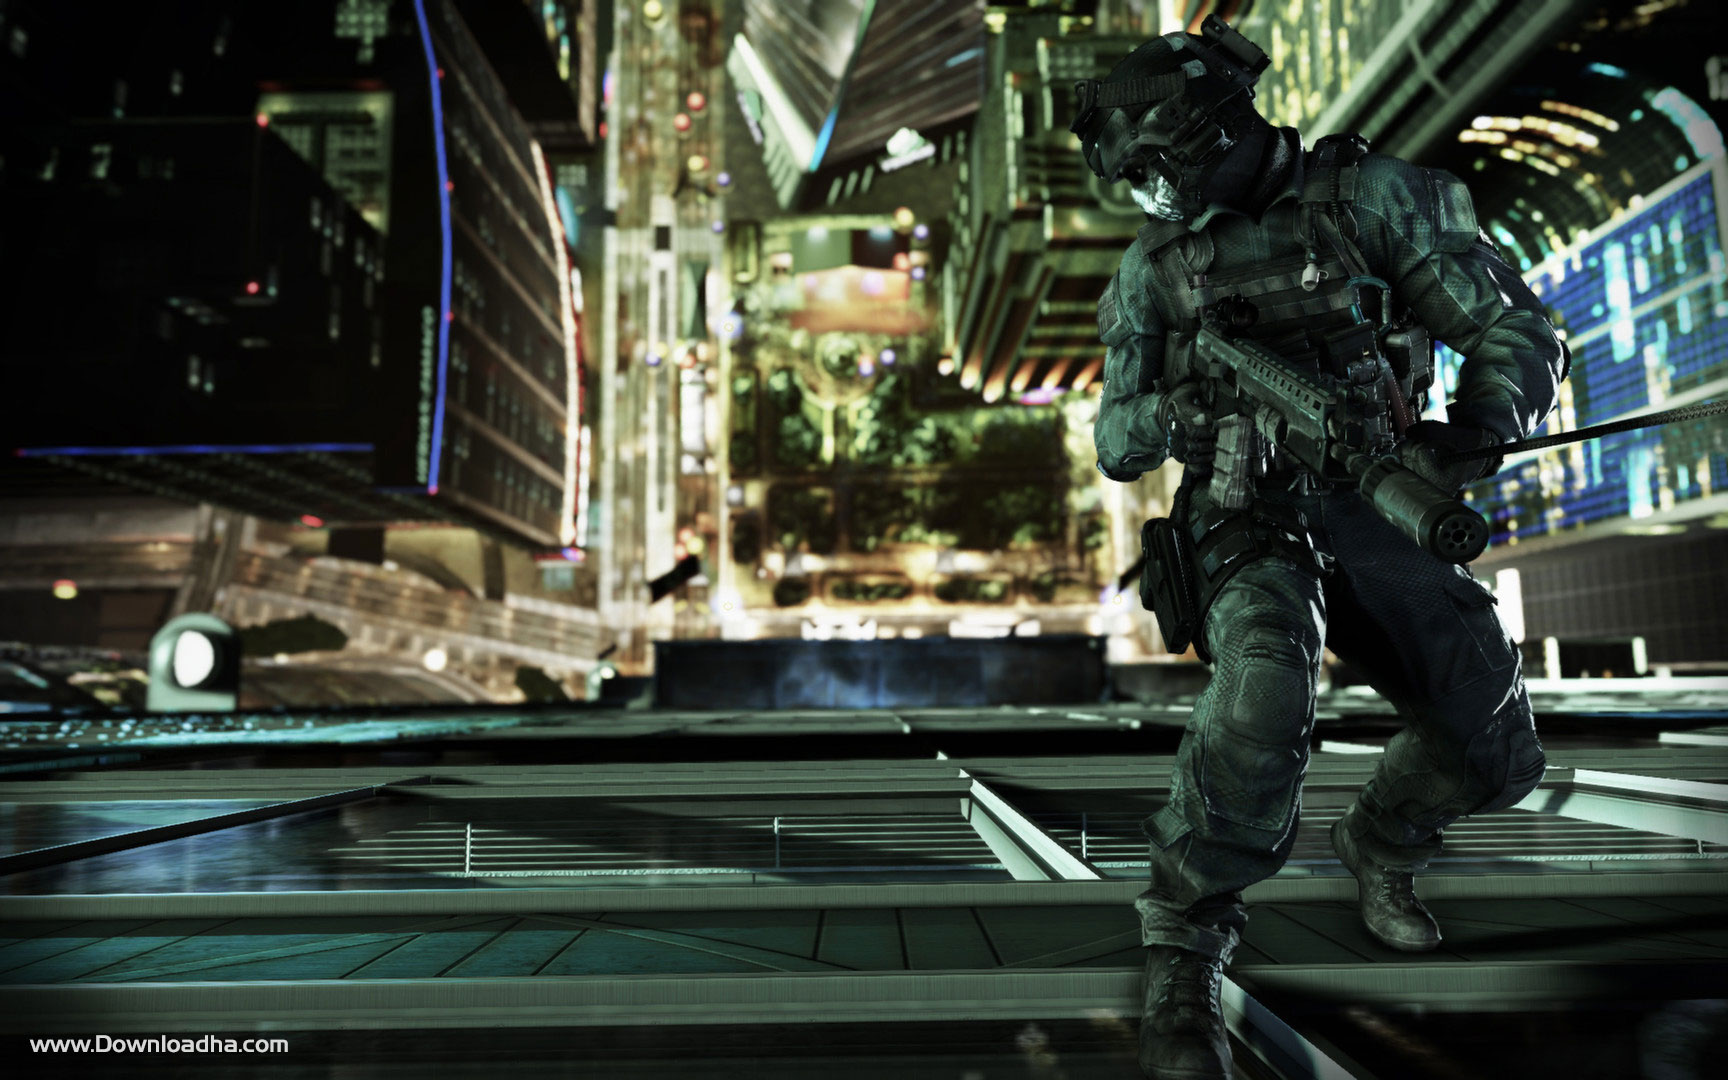 Call-of-Duty-Ghosts-screenshots-02-large